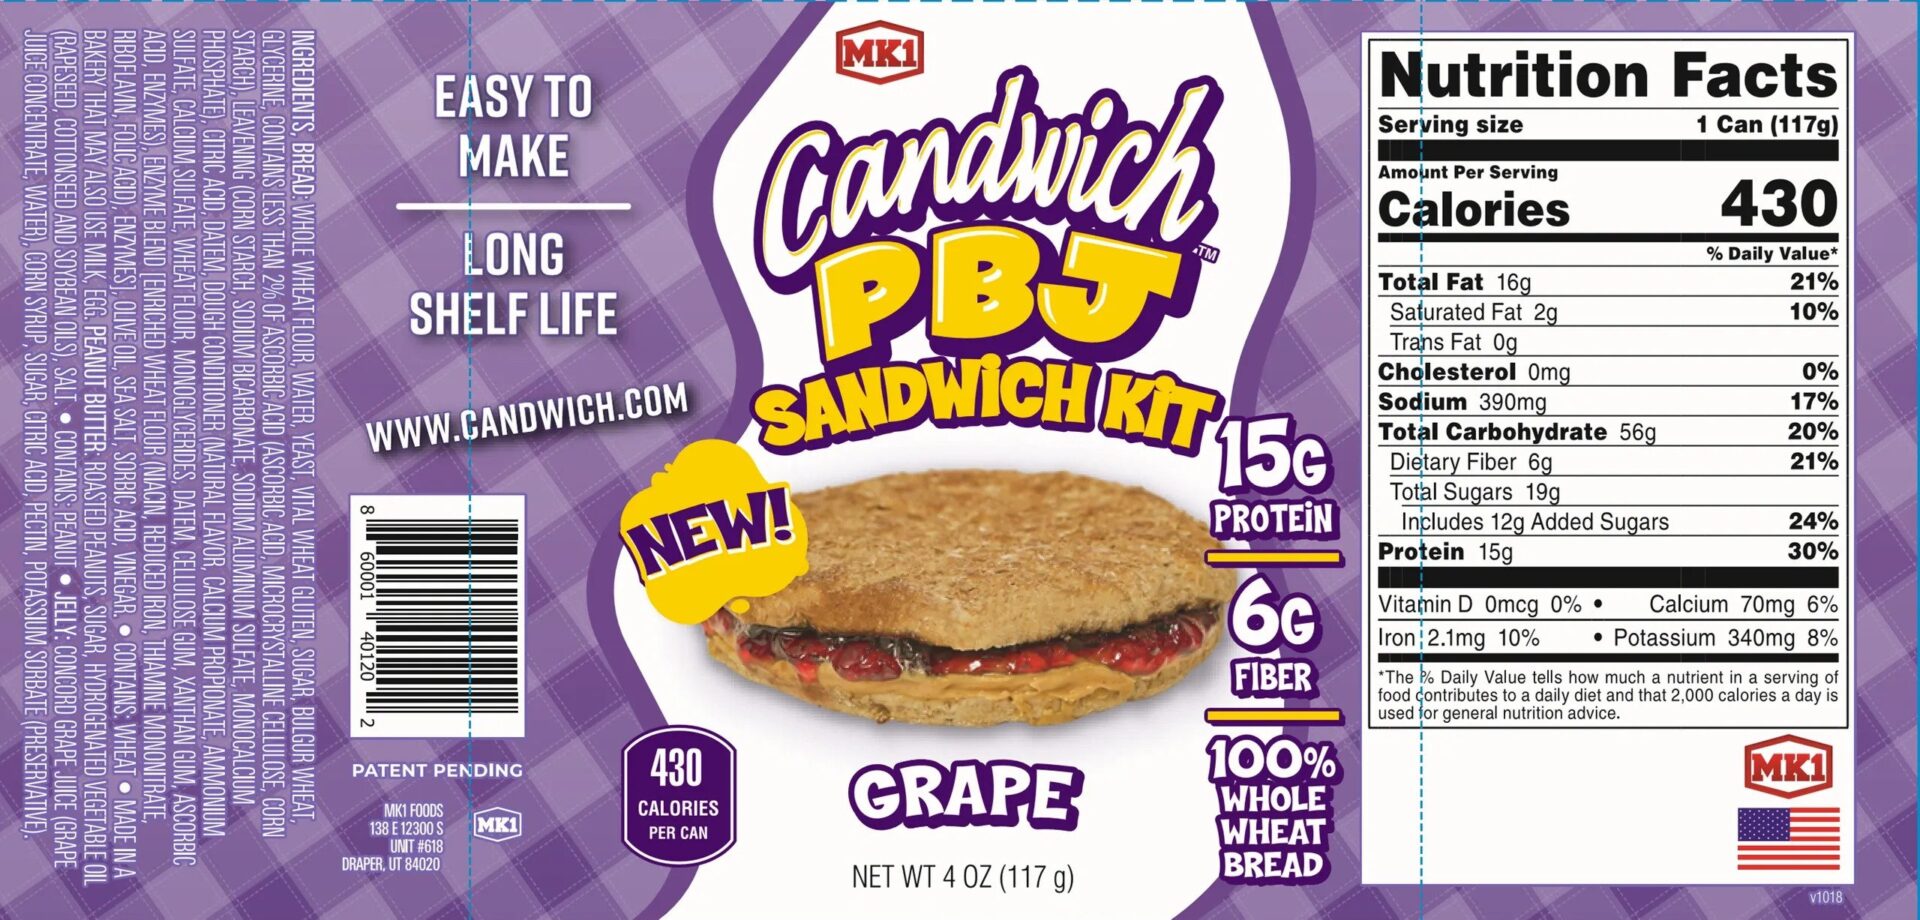 A sandwich kit with purple and white background